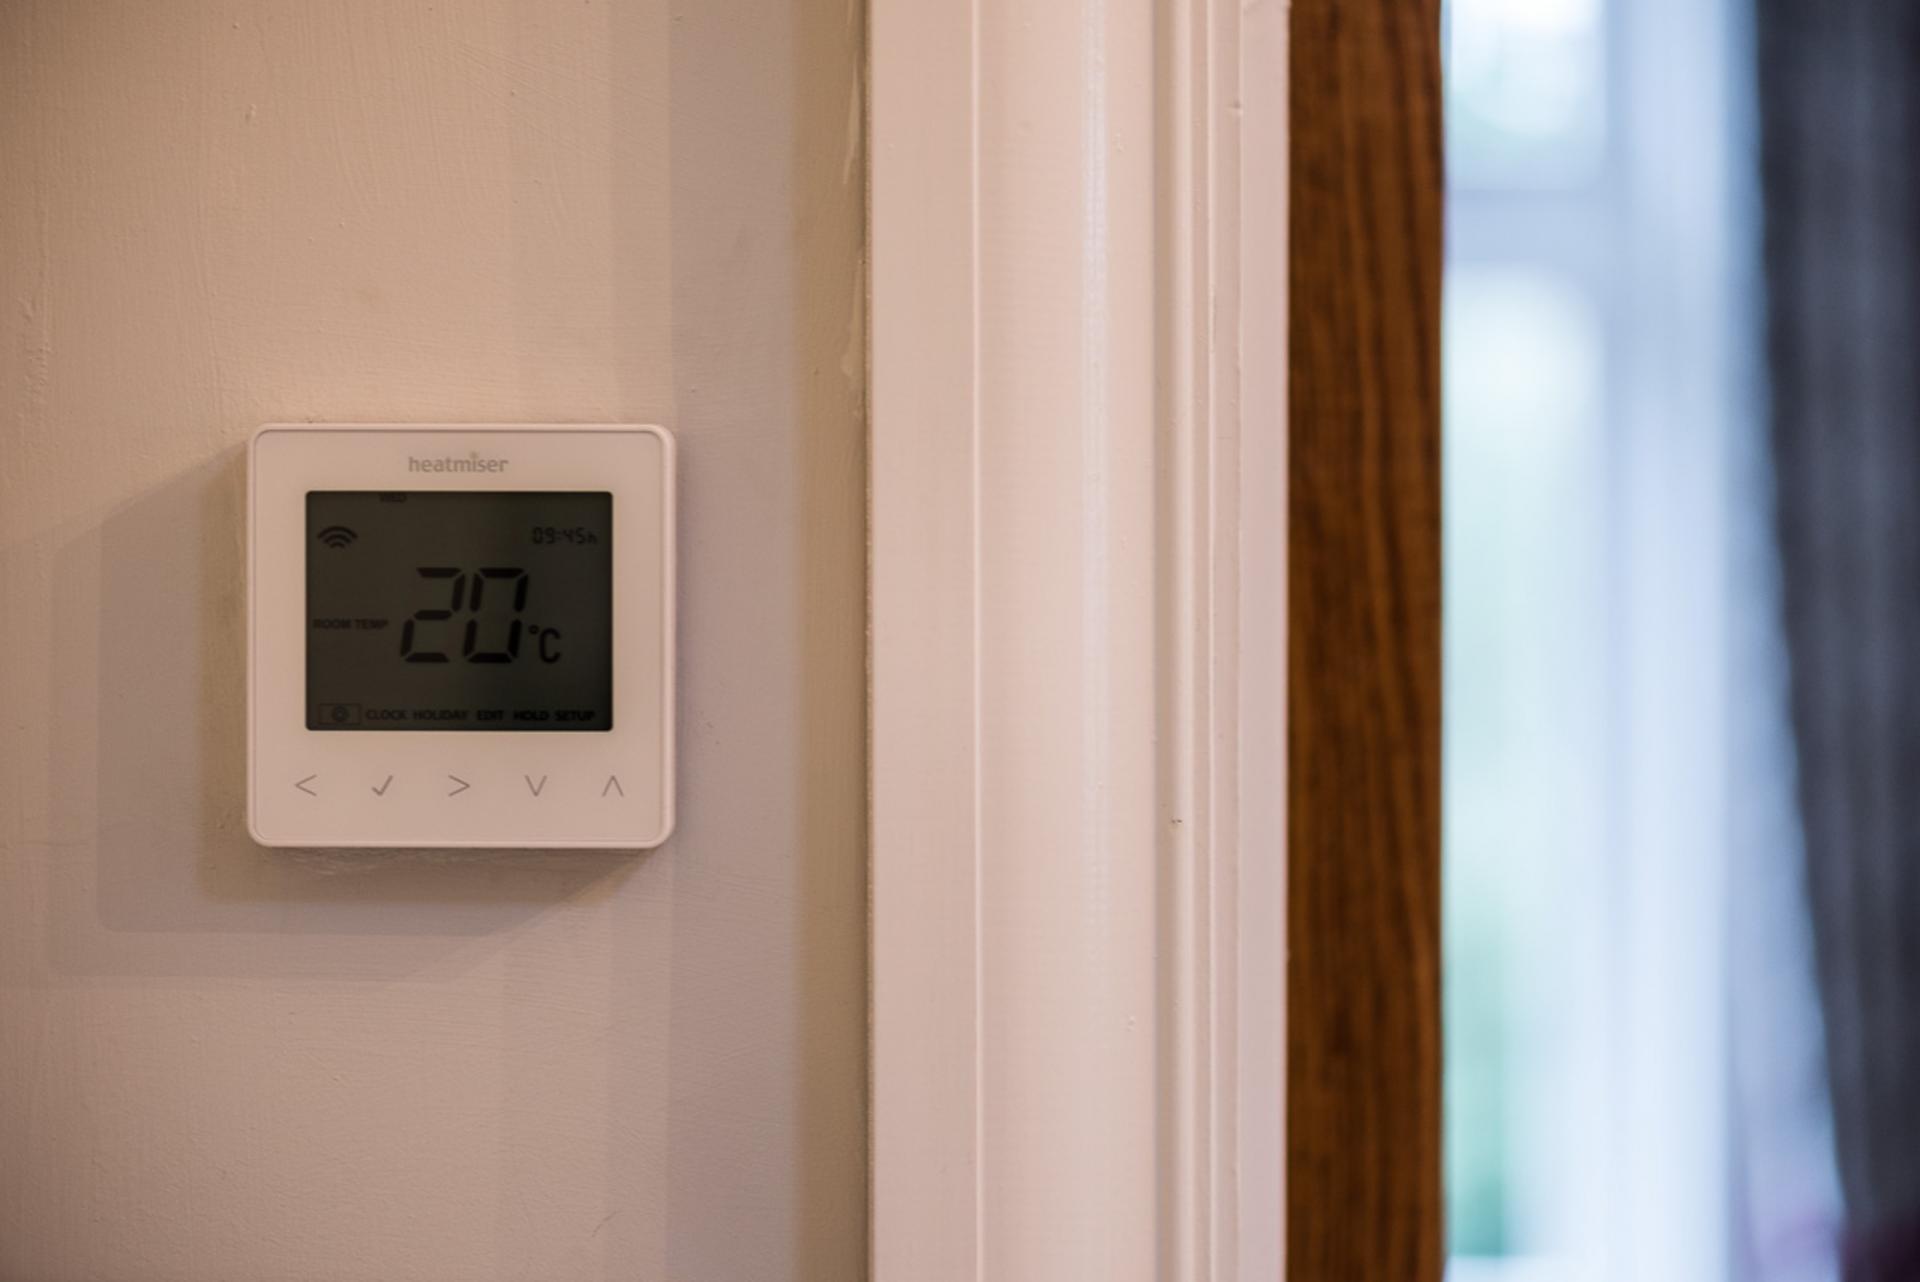 Smart thermostat firm to be acquired at up to 5.7x turnover